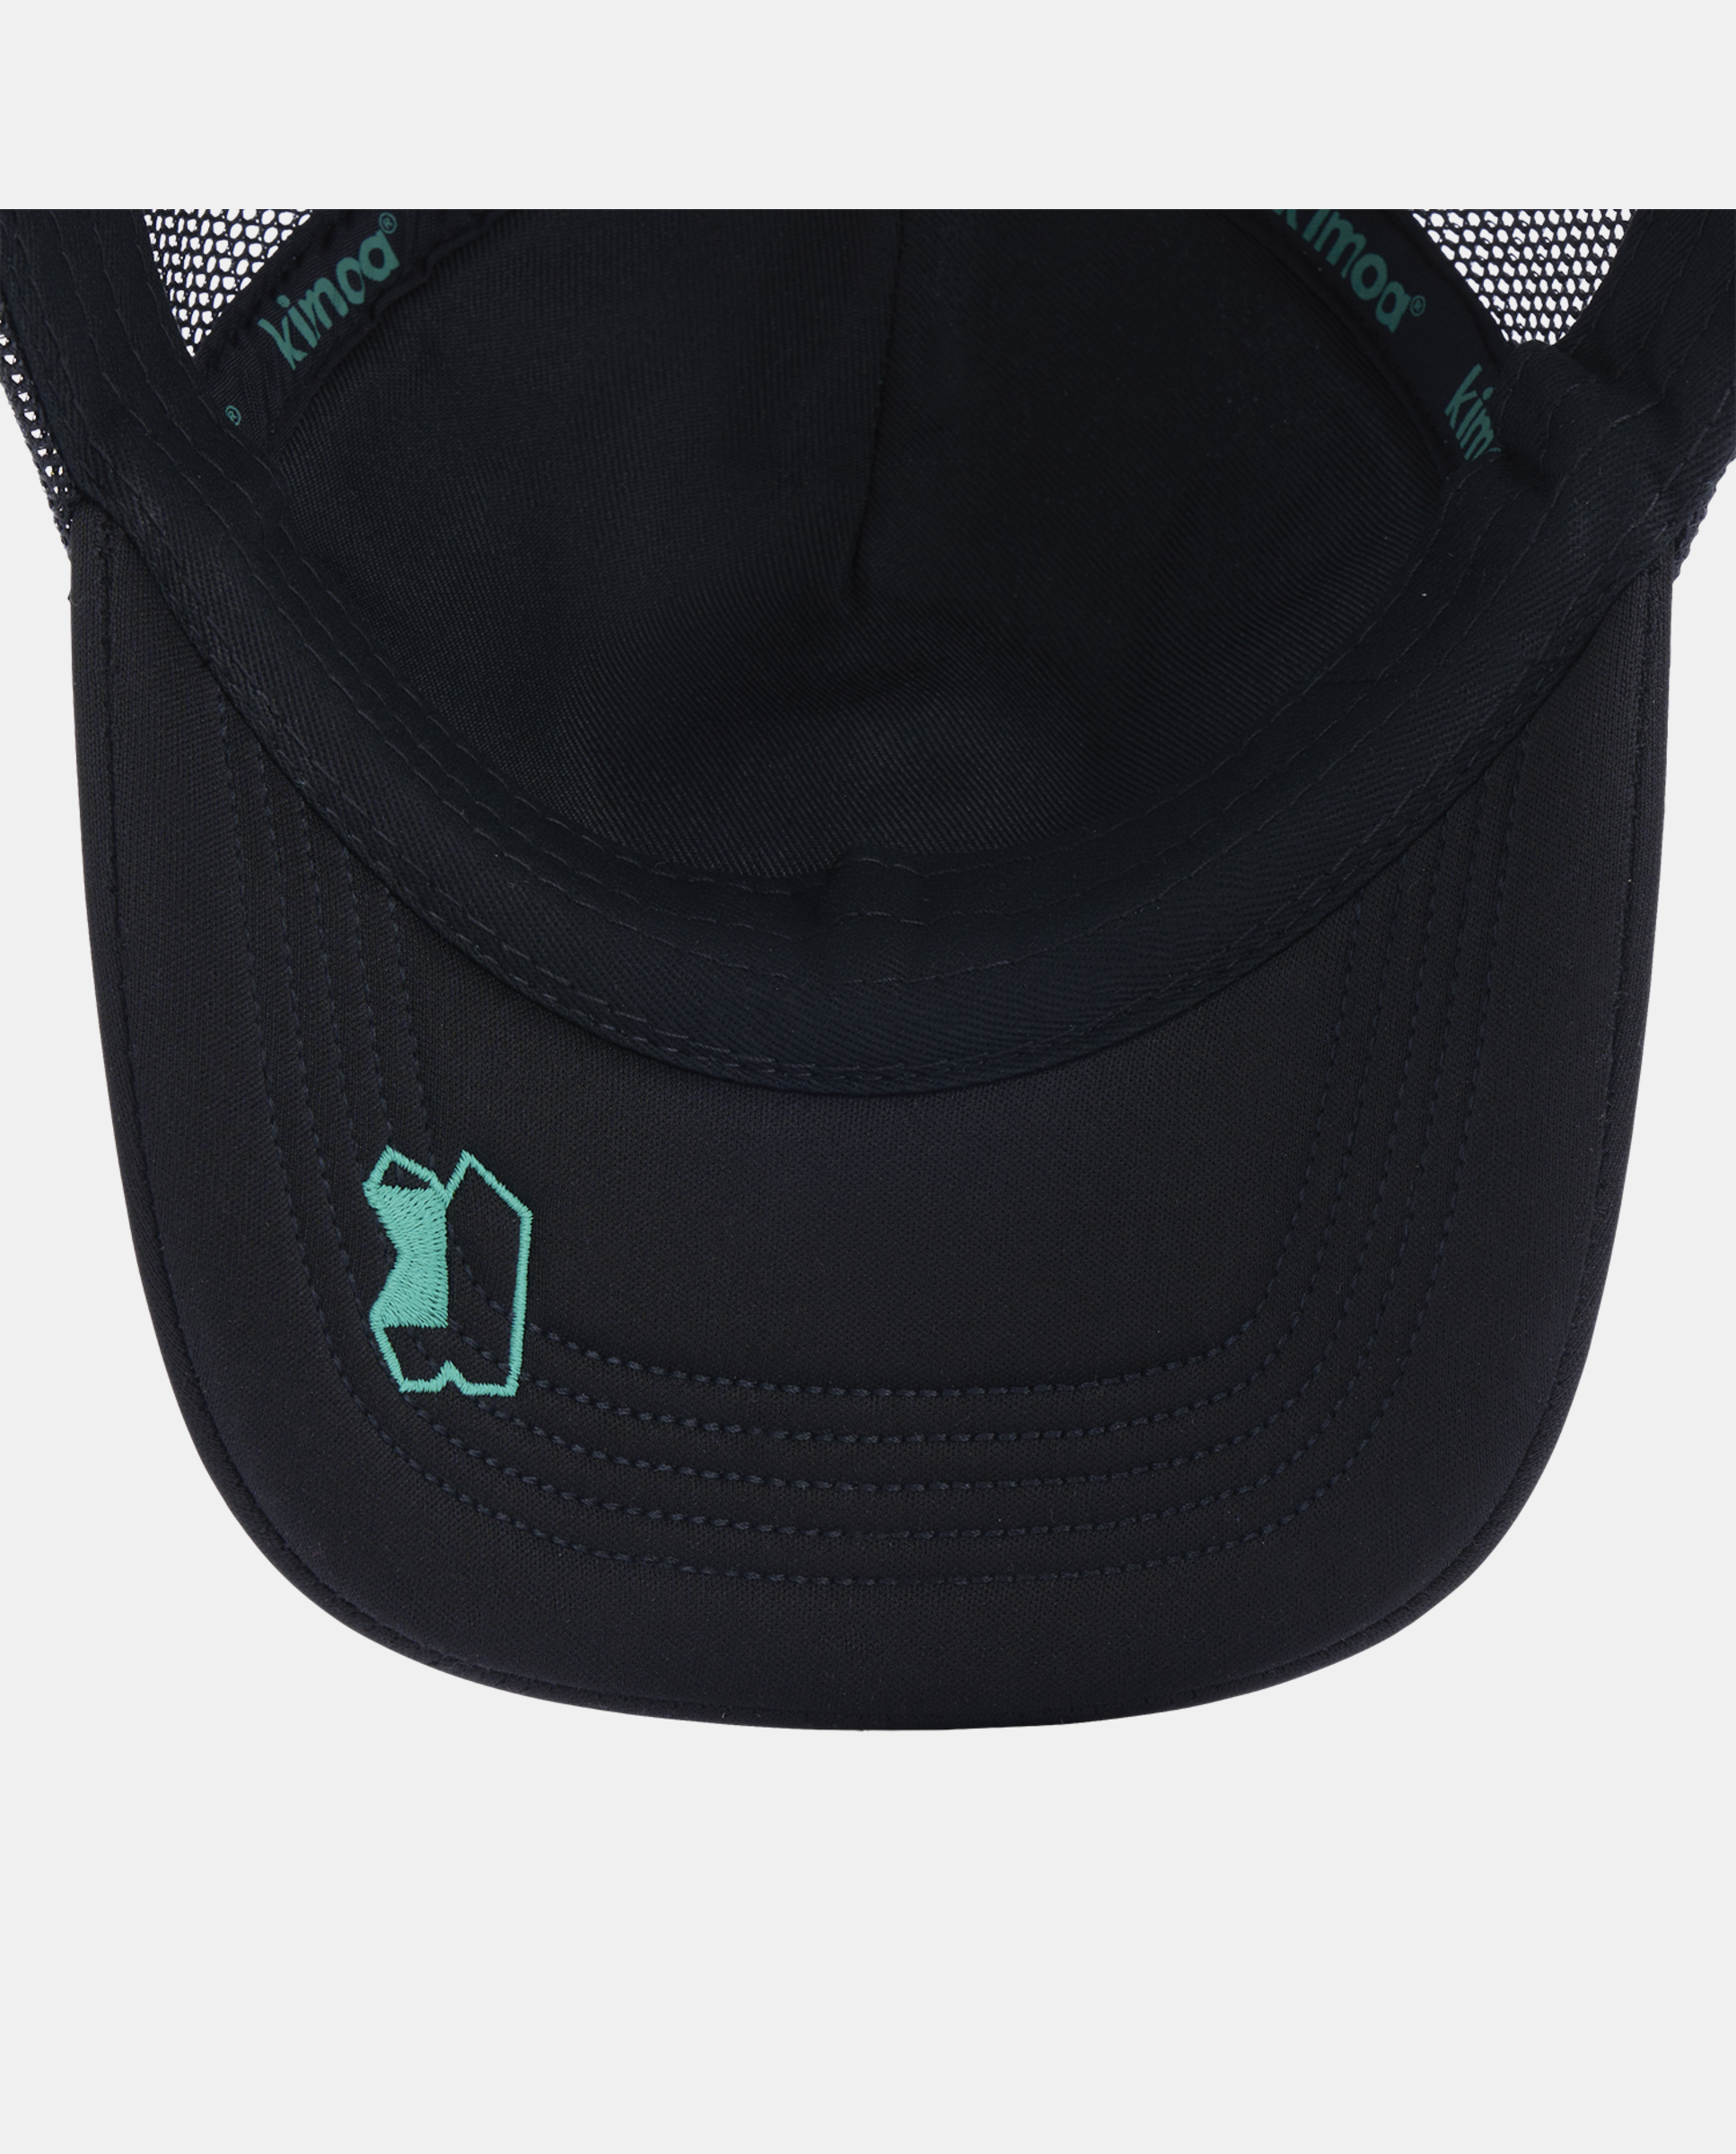 Racing Patch White Cap